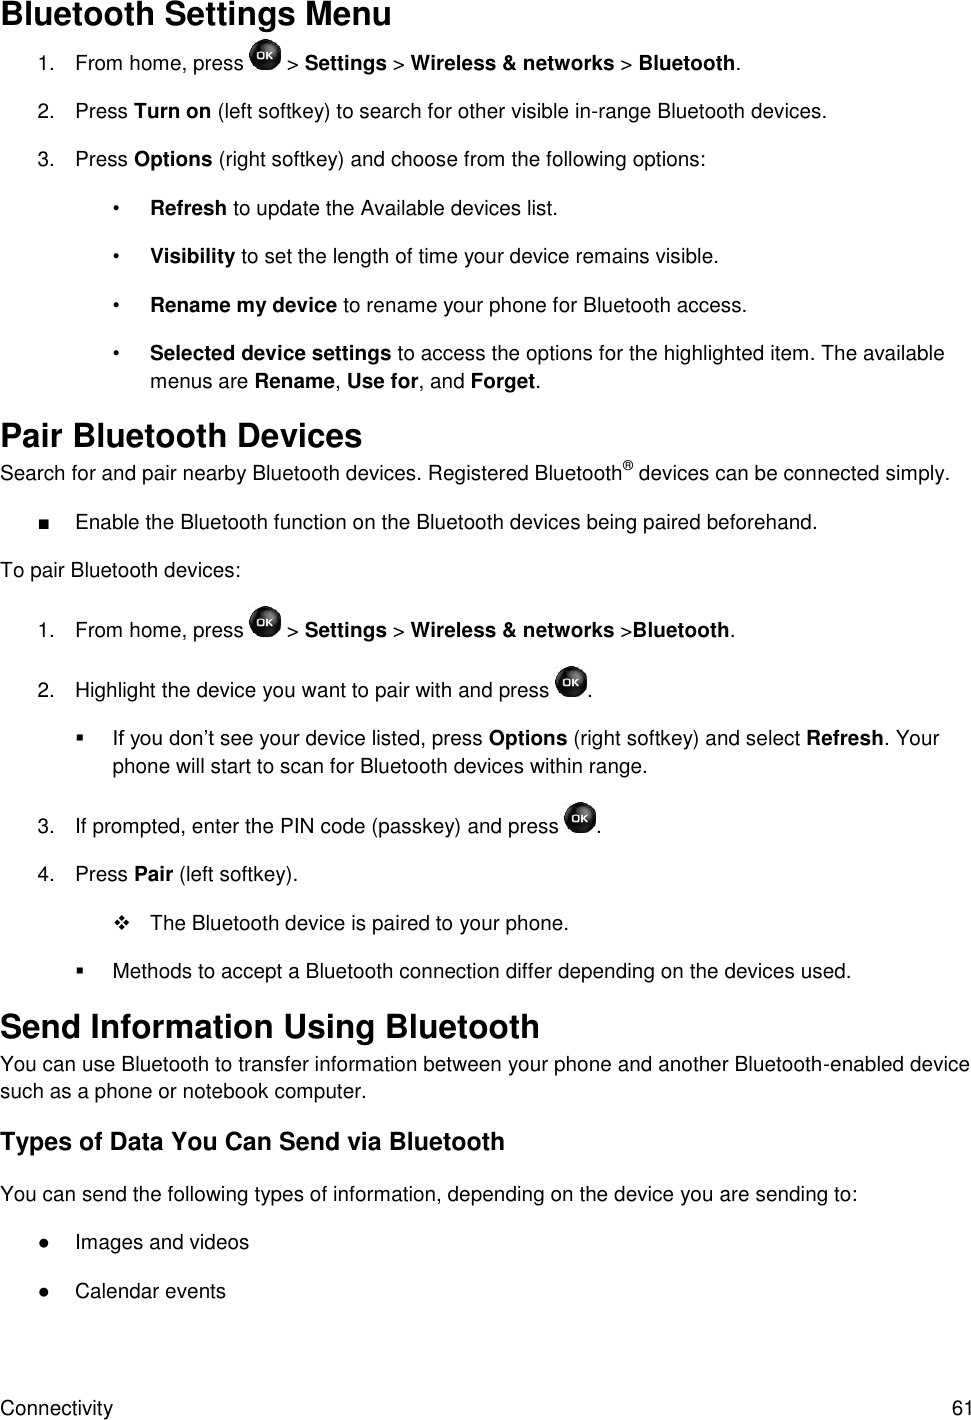 Connectivity  61 Bluetooth Settings Menu 1.  From home, press  &gt; Settings &gt; Wireless &amp; networks &gt; Bluetooth.  2.  Press Turn on (left softkey) to search for other visible in-range Bluetooth devices. 3.  Press Options (right softkey) and choose from the following options: • Refresh to update the Available devices list. • Visibility to set the length of time your device remains visible. • Rename my device to rename your phone for Bluetooth access. • Selected device settings to access the options for the highlighted item. The available menus are Rename, Use for, and Forget. Pair Bluetooth Devices Search for and pair nearby Bluetooth devices. Registered Bluetooth® devices can be connected simply. ■  Enable the Bluetooth function on the Bluetooth devices being paired beforehand. To pair Bluetooth devices: 1.  From home, press  &gt; Settings &gt; Wireless &amp; networks &gt;Bluetooth.  2.  Highlight the device you want to pair with and press  .  If you don’t see your device listed, press Options (right softkey) and select Refresh. Your phone will start to scan for Bluetooth devices within range. 3.  If prompted, enter the PIN code (passkey) and press  . 4.  Press Pair (left softkey).   The Bluetooth device is paired to your phone.   Methods to accept a Bluetooth connection differ depending on the devices used. Send Information Using Bluetooth You can use Bluetooth to transfer information between your phone and another Bluetooth-enabled device such as a phone or notebook computer.  Types of Data You Can Send via Bluetooth You can send the following types of information, depending on the device you are sending to: ●  Images and videos ●  Calendar events 